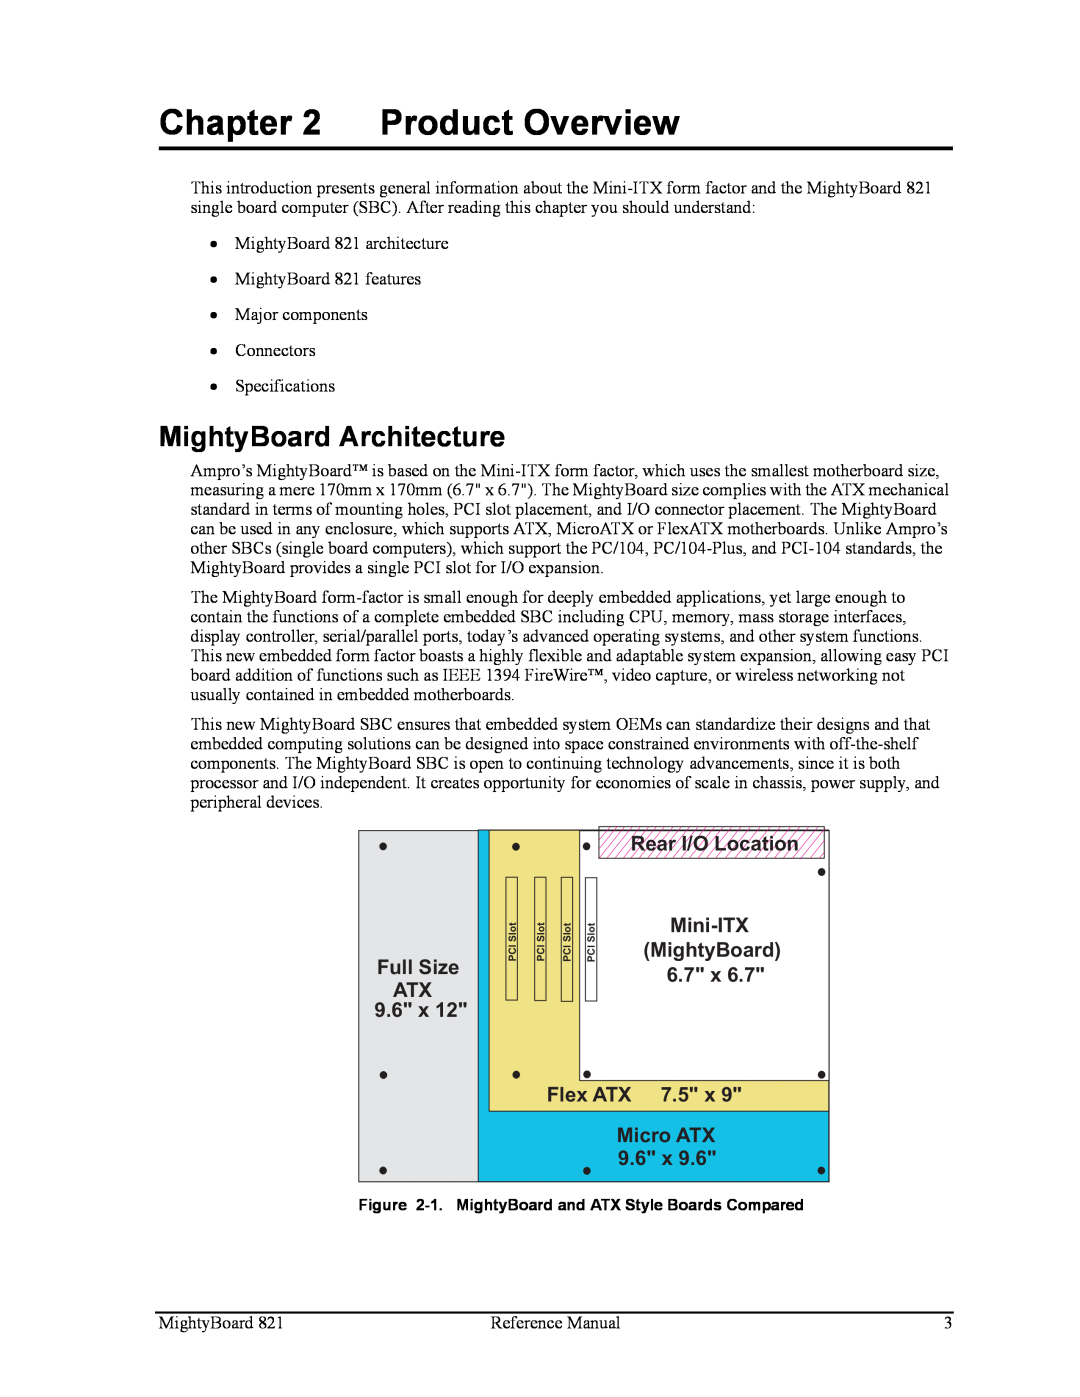 Ampro Corporation MightyBoard 821 manual Product Overview, MightyBoard Architecture, Full Size ATX 9.6 x, Rear I/O Location 